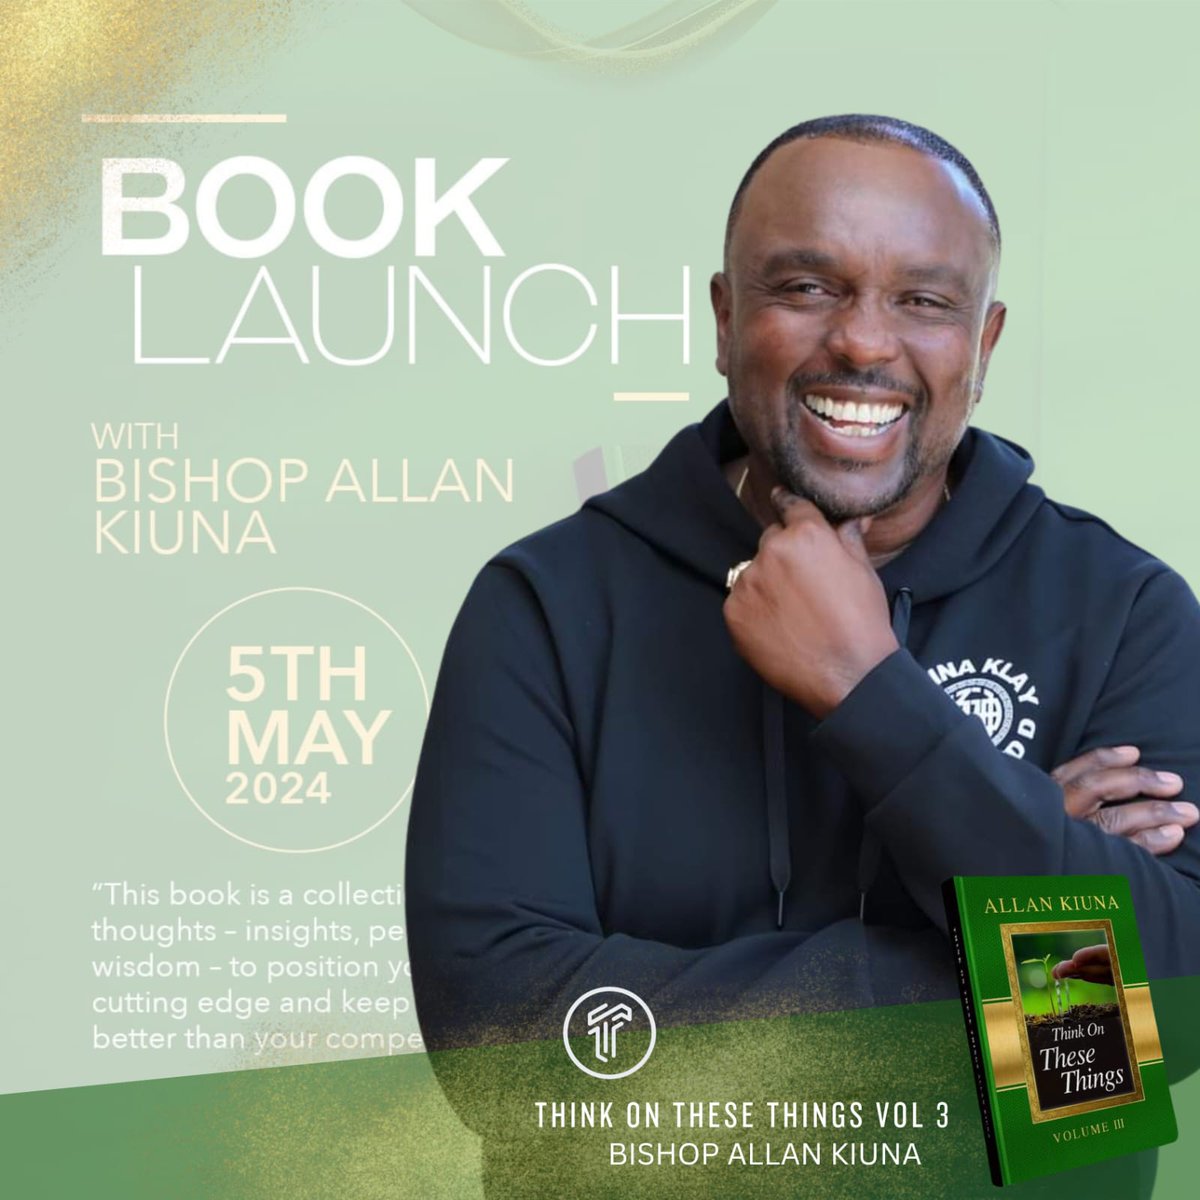 I love reading books.
This is a must buy and must ready.
Think on these things volume 3.
Author @BishopKiuna .
Launch on 5th May.
@JccKenya 

#TOTTBookLaunch